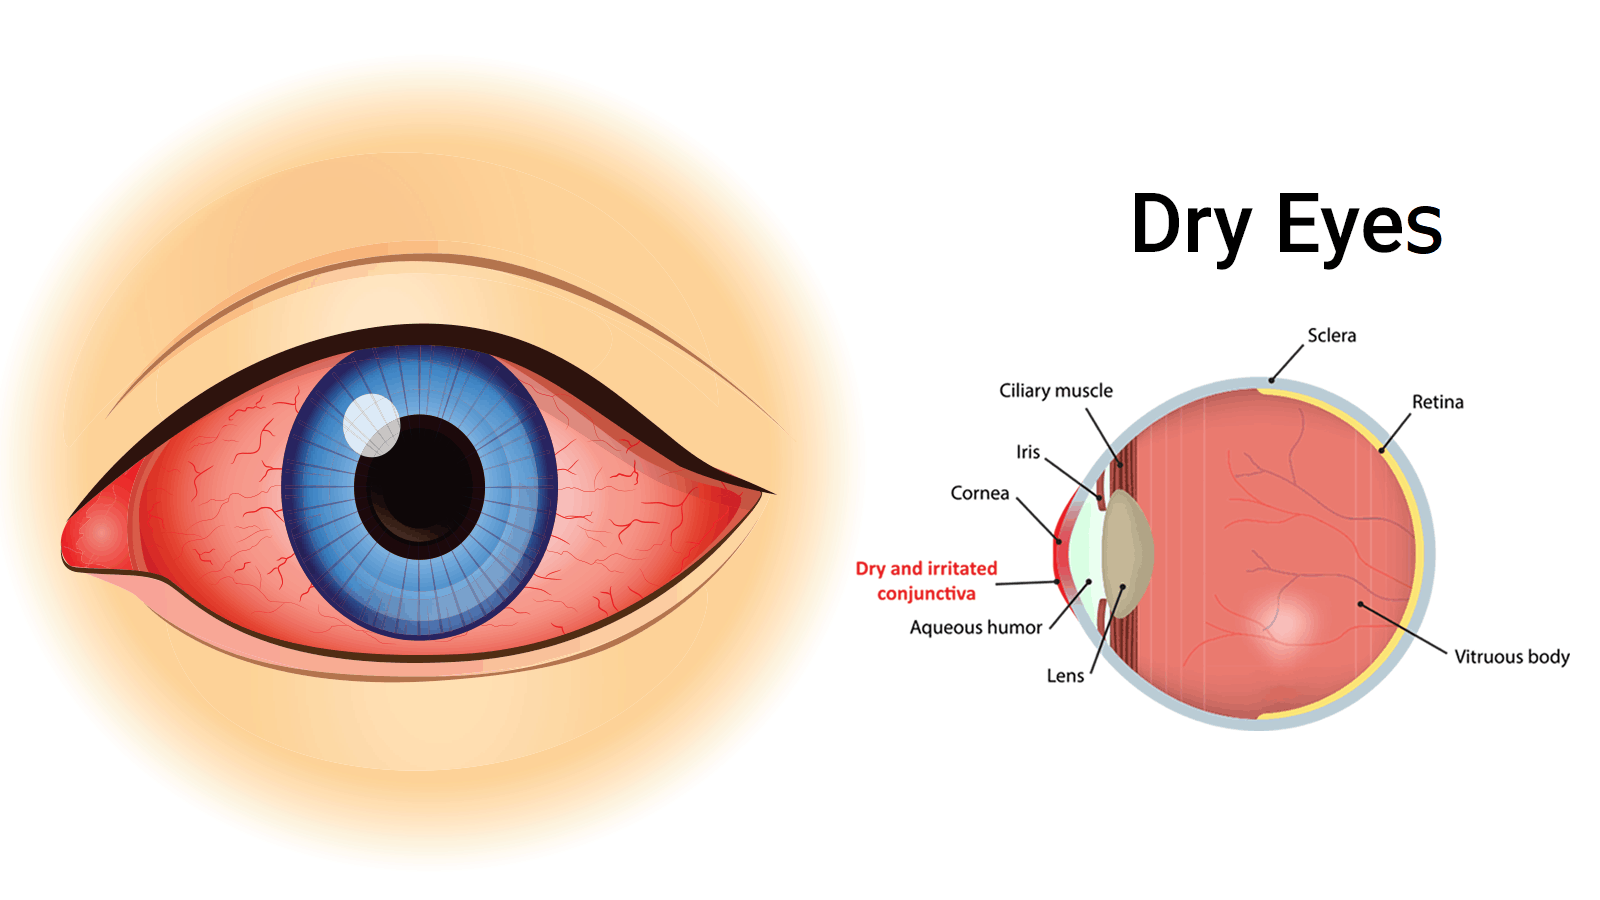 4 Easy Ways to Heal Dry Eyes Naturally